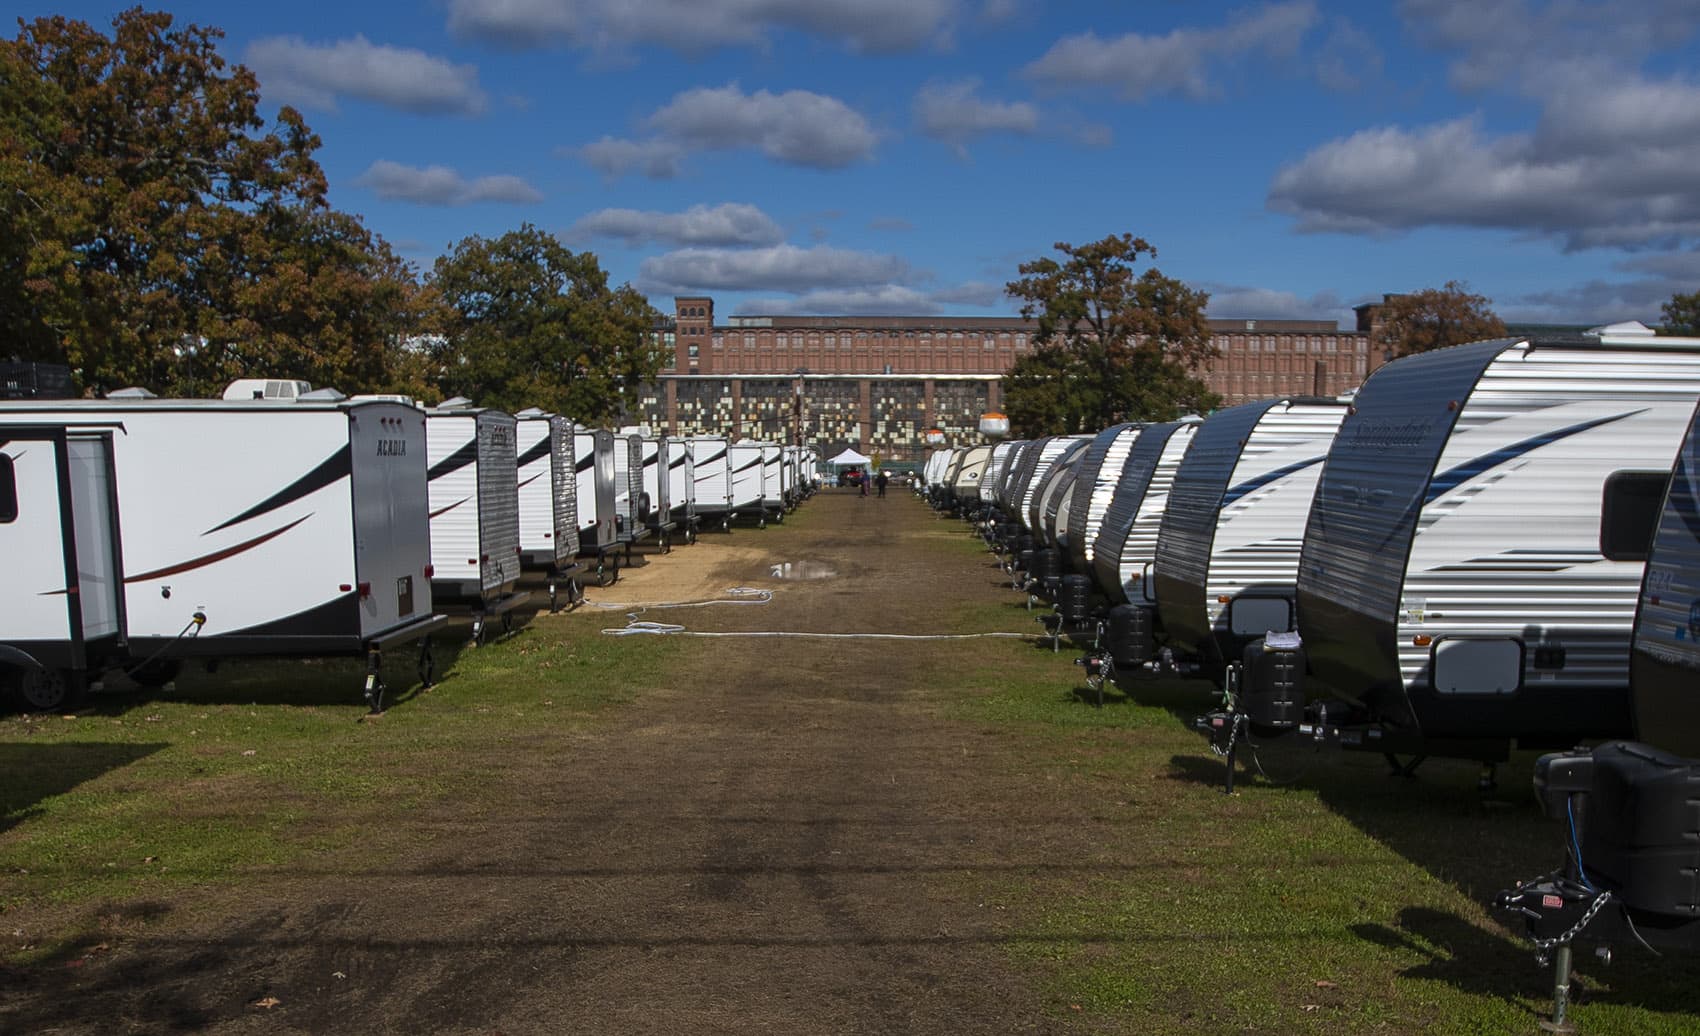 FEMA trailers at the O’Connell South Common in Lawrence are being used as alternative housing for people who were affected by the gas explosions in the Merrimack Valley. (Jesse Costa/WBUR)